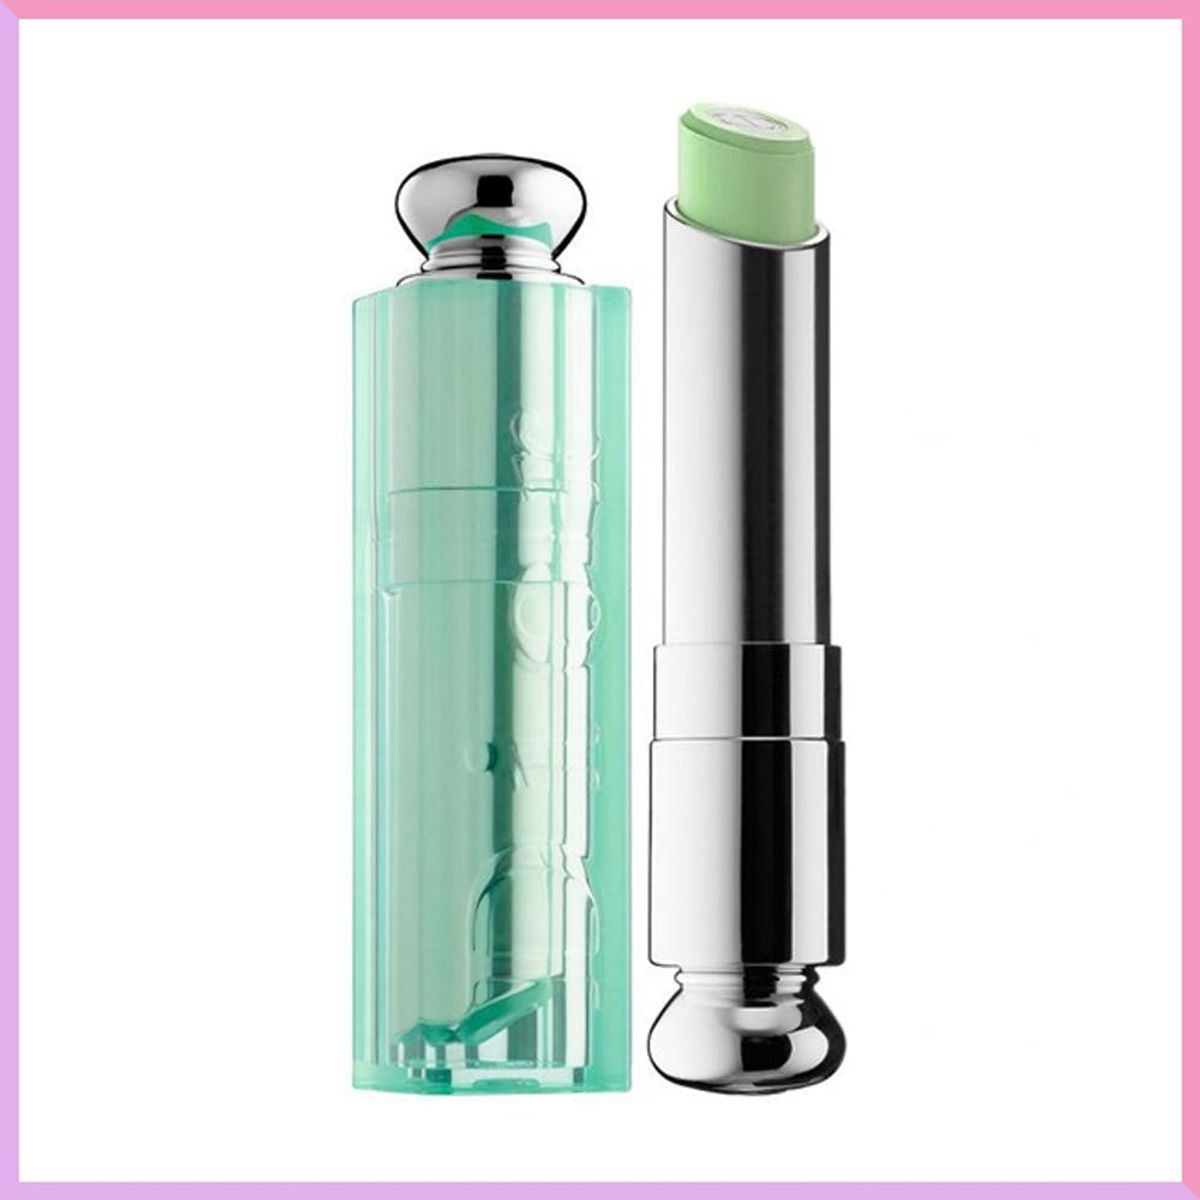 8 Beauty Sticks for the Lazy Girl in All of Us